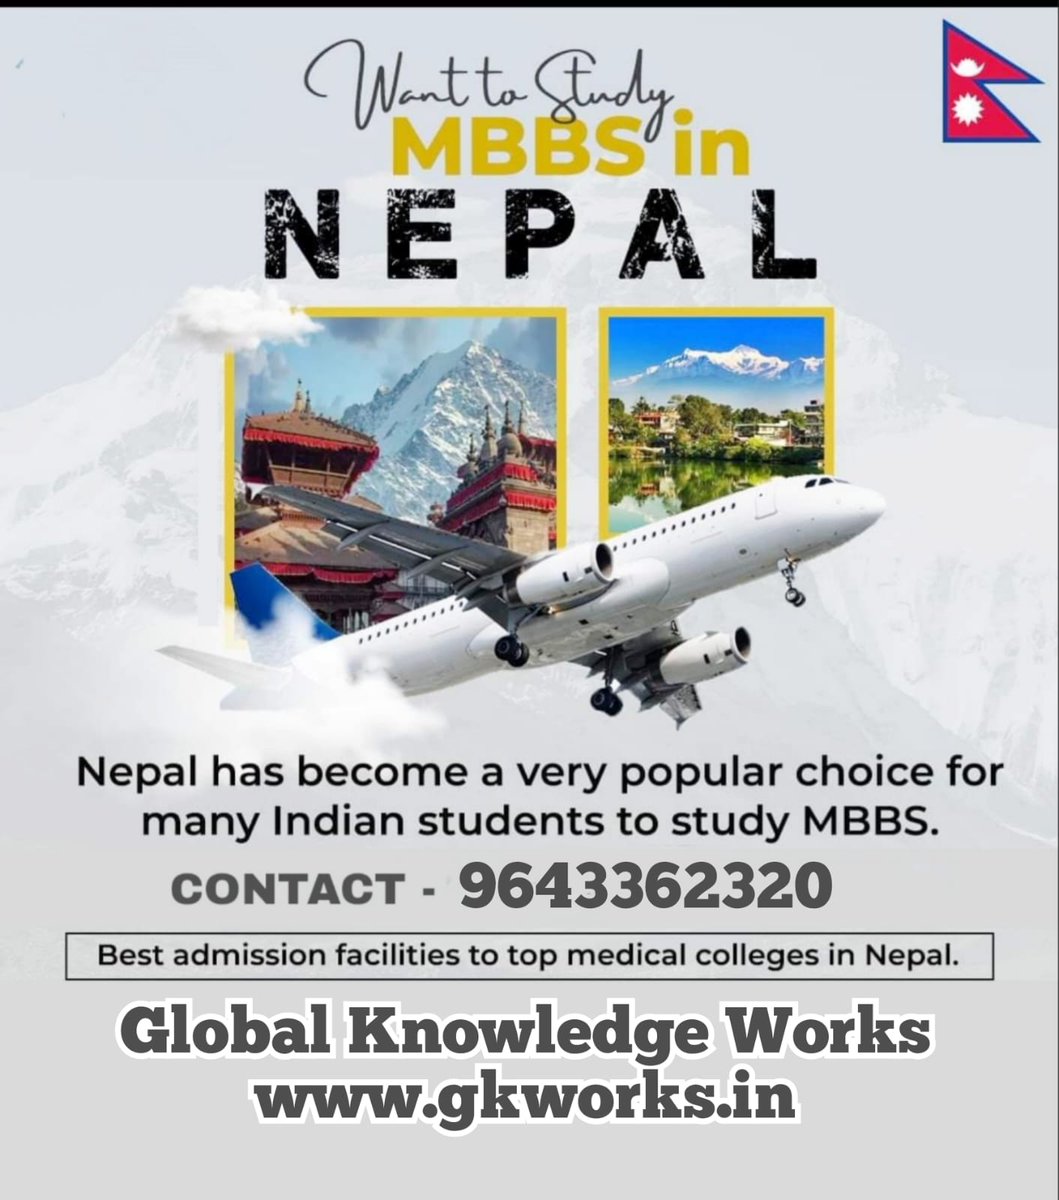 'MBBS in Nepal: Empowering Medical Aspirations Close to Home!'
#mbbsabroad2023 #mbbsnepal #GKworks #vivekgupta #nepalmbbs #bestmbbscounsellors #mbbsadmission #mbbsadmission2023